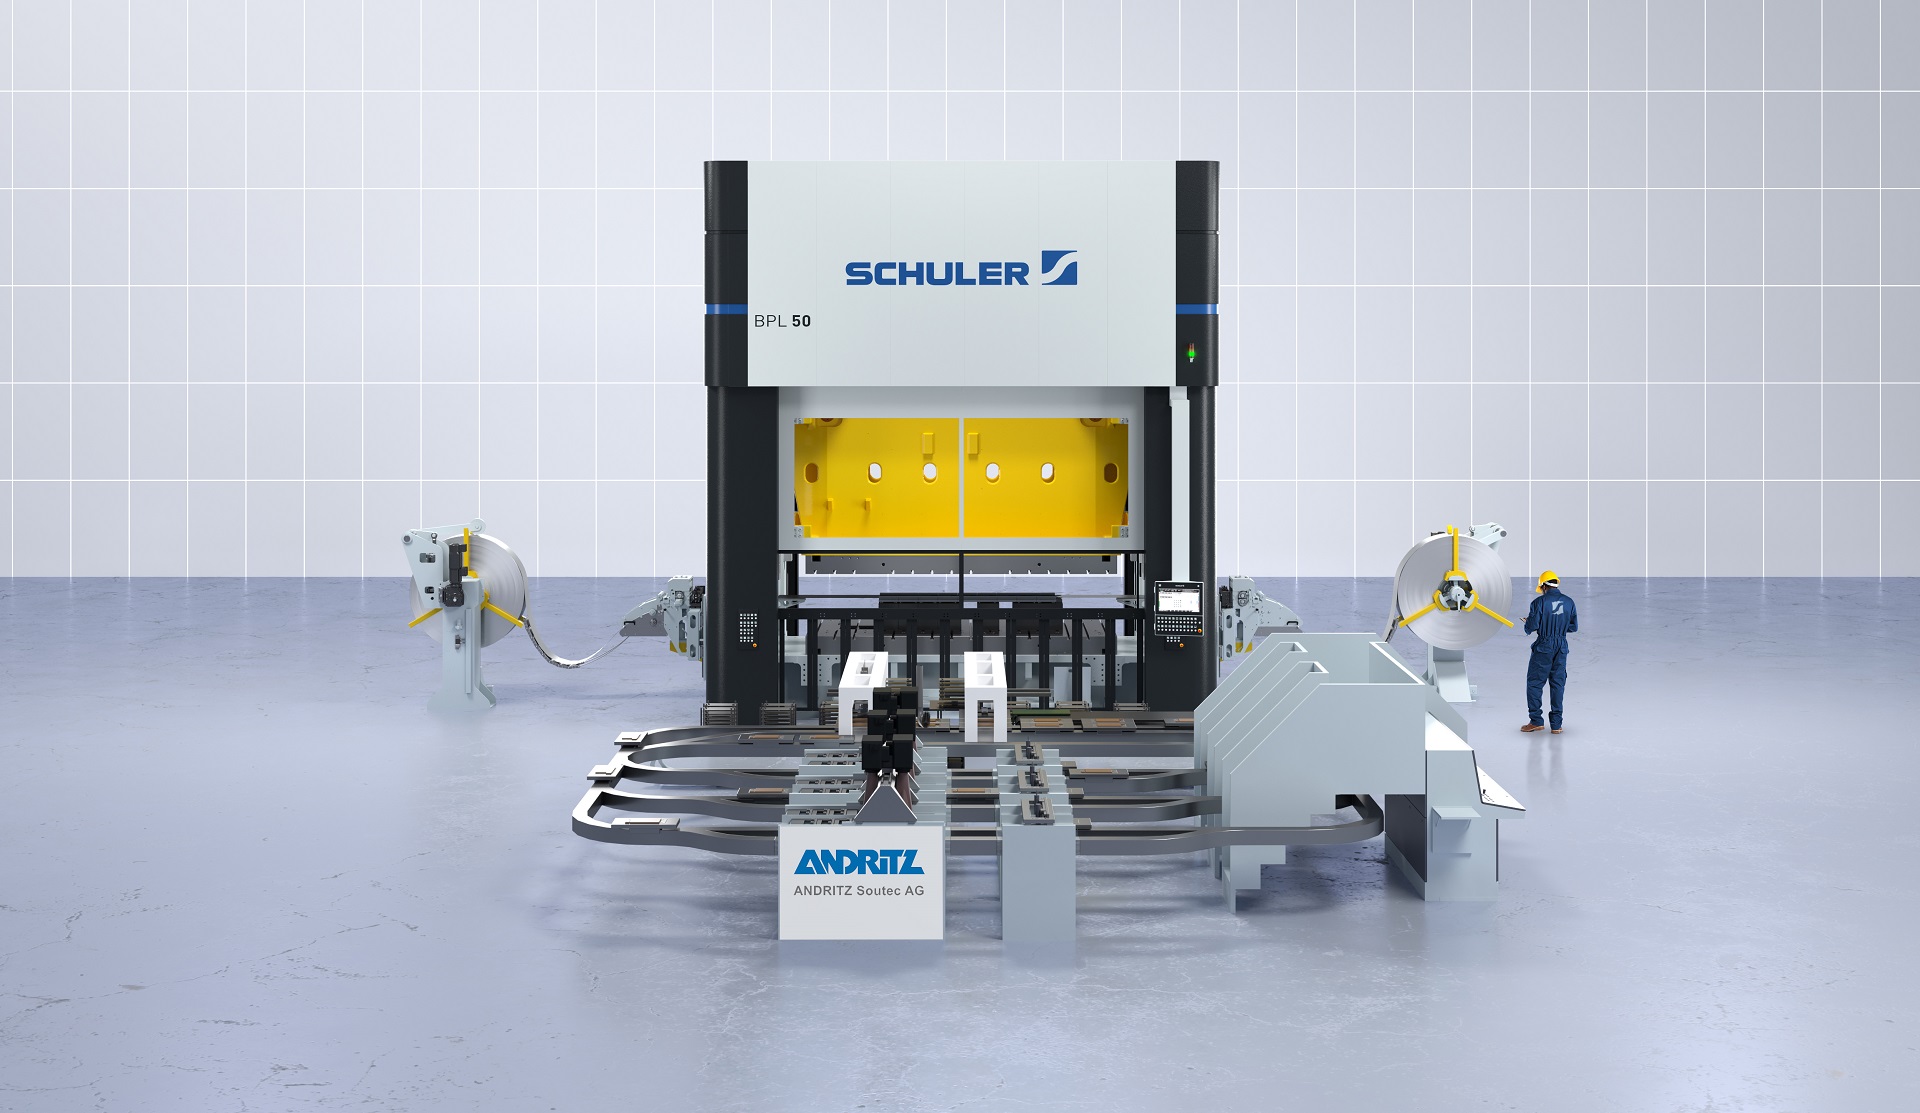 Targeting high volume production: Schuler's scalable lines are designed for the production of up to 50,000 stacks with around 15 million bipolar plates.